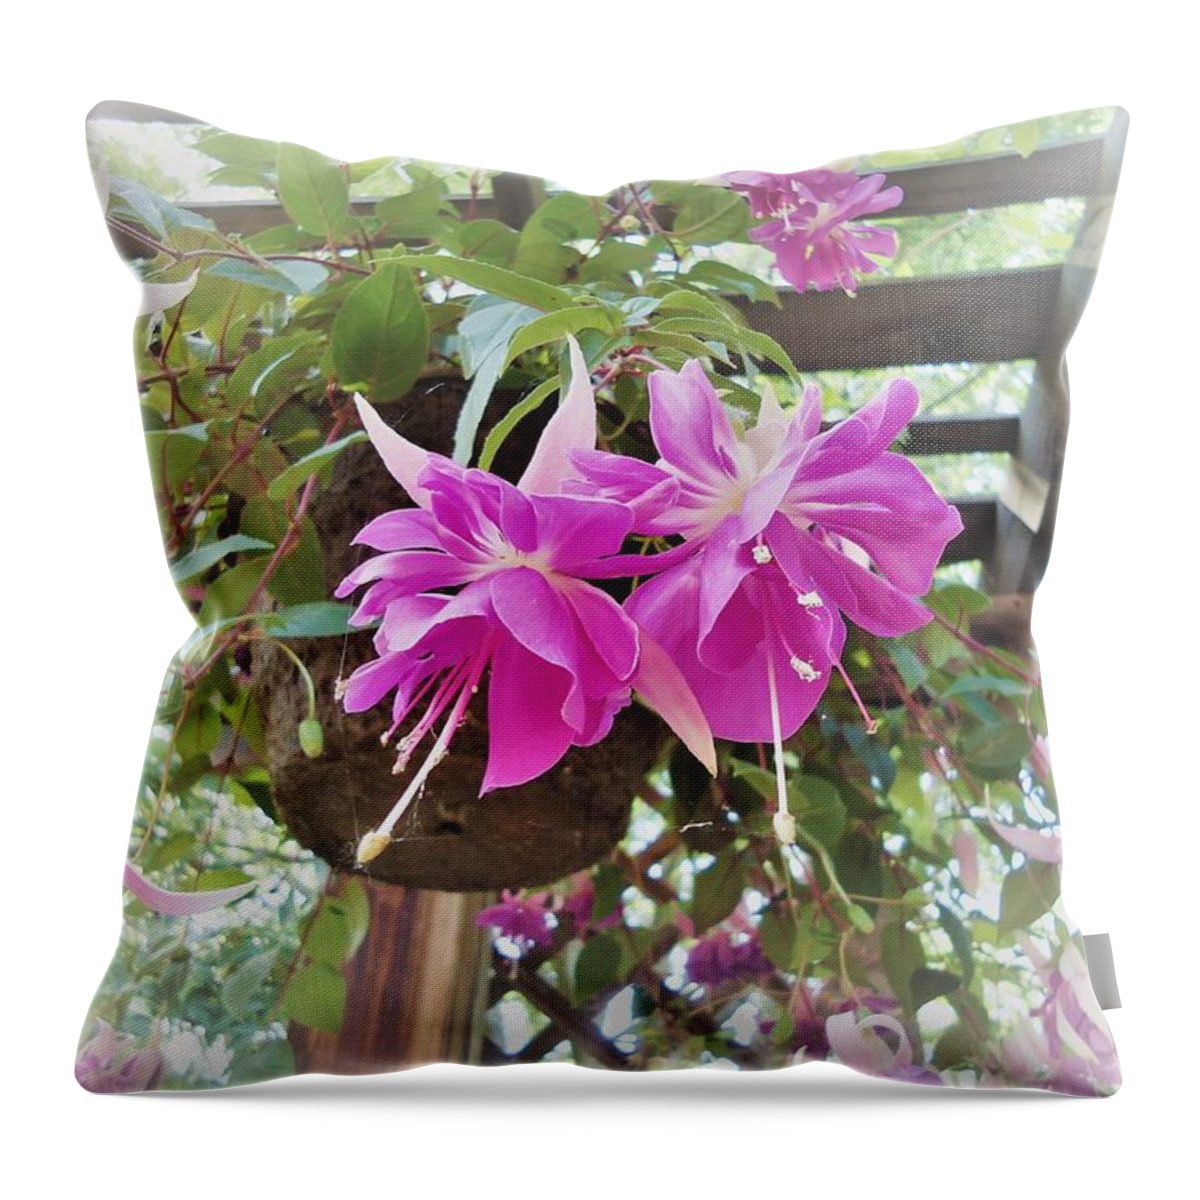 Fuchsia Throw Pillow featuring the digital art My Day In The Sun by Ann Johndro-Collins